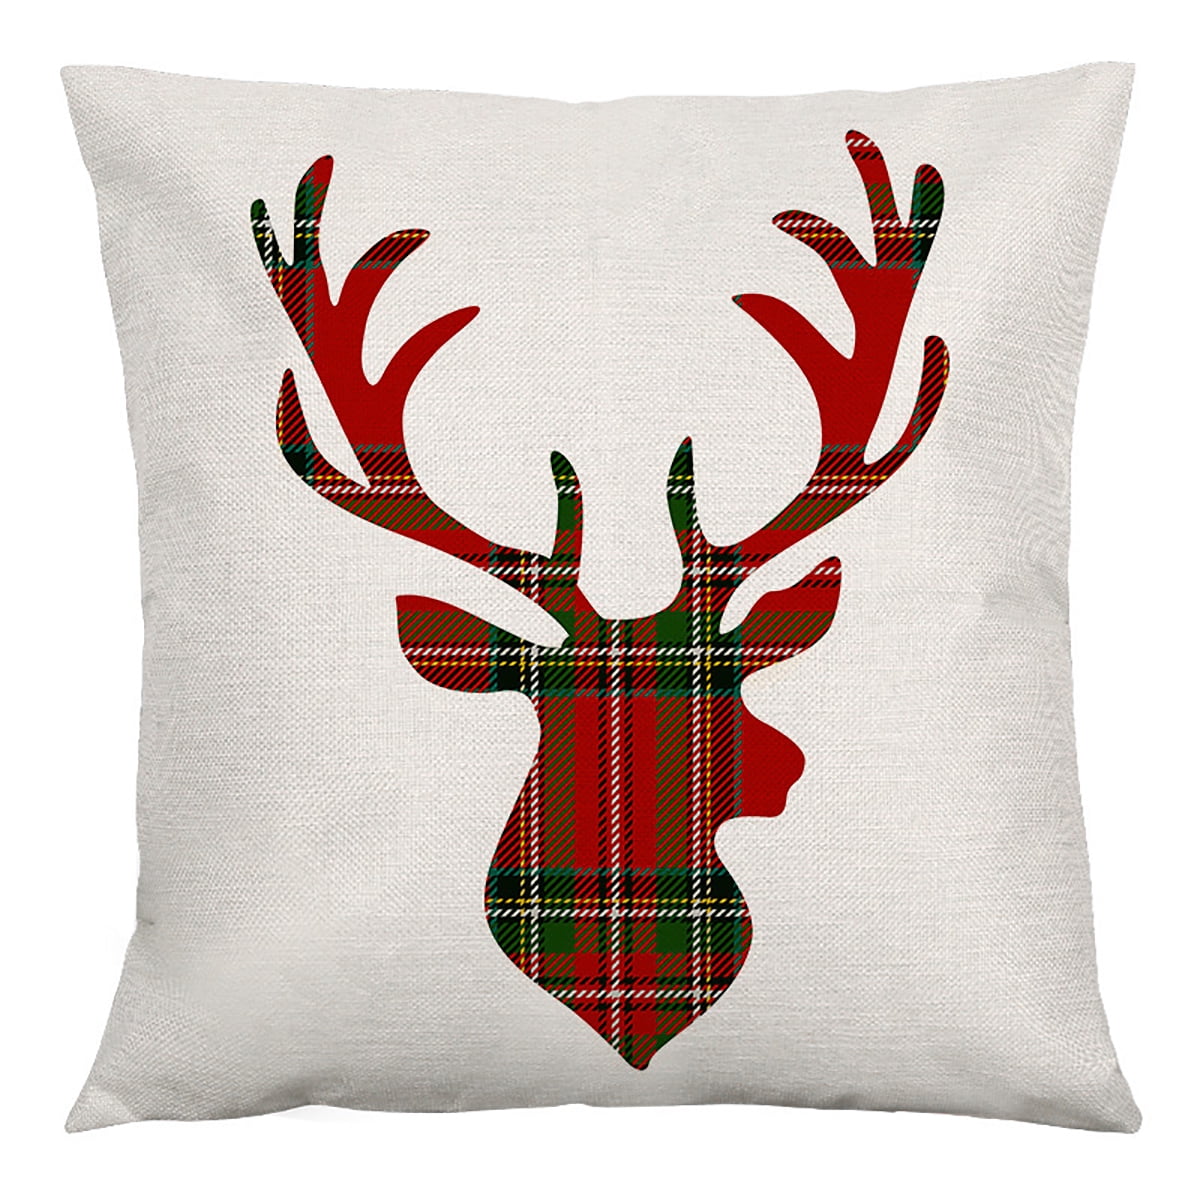 Christmas Pillow Covers for Cheap! - Six Clever Sisters